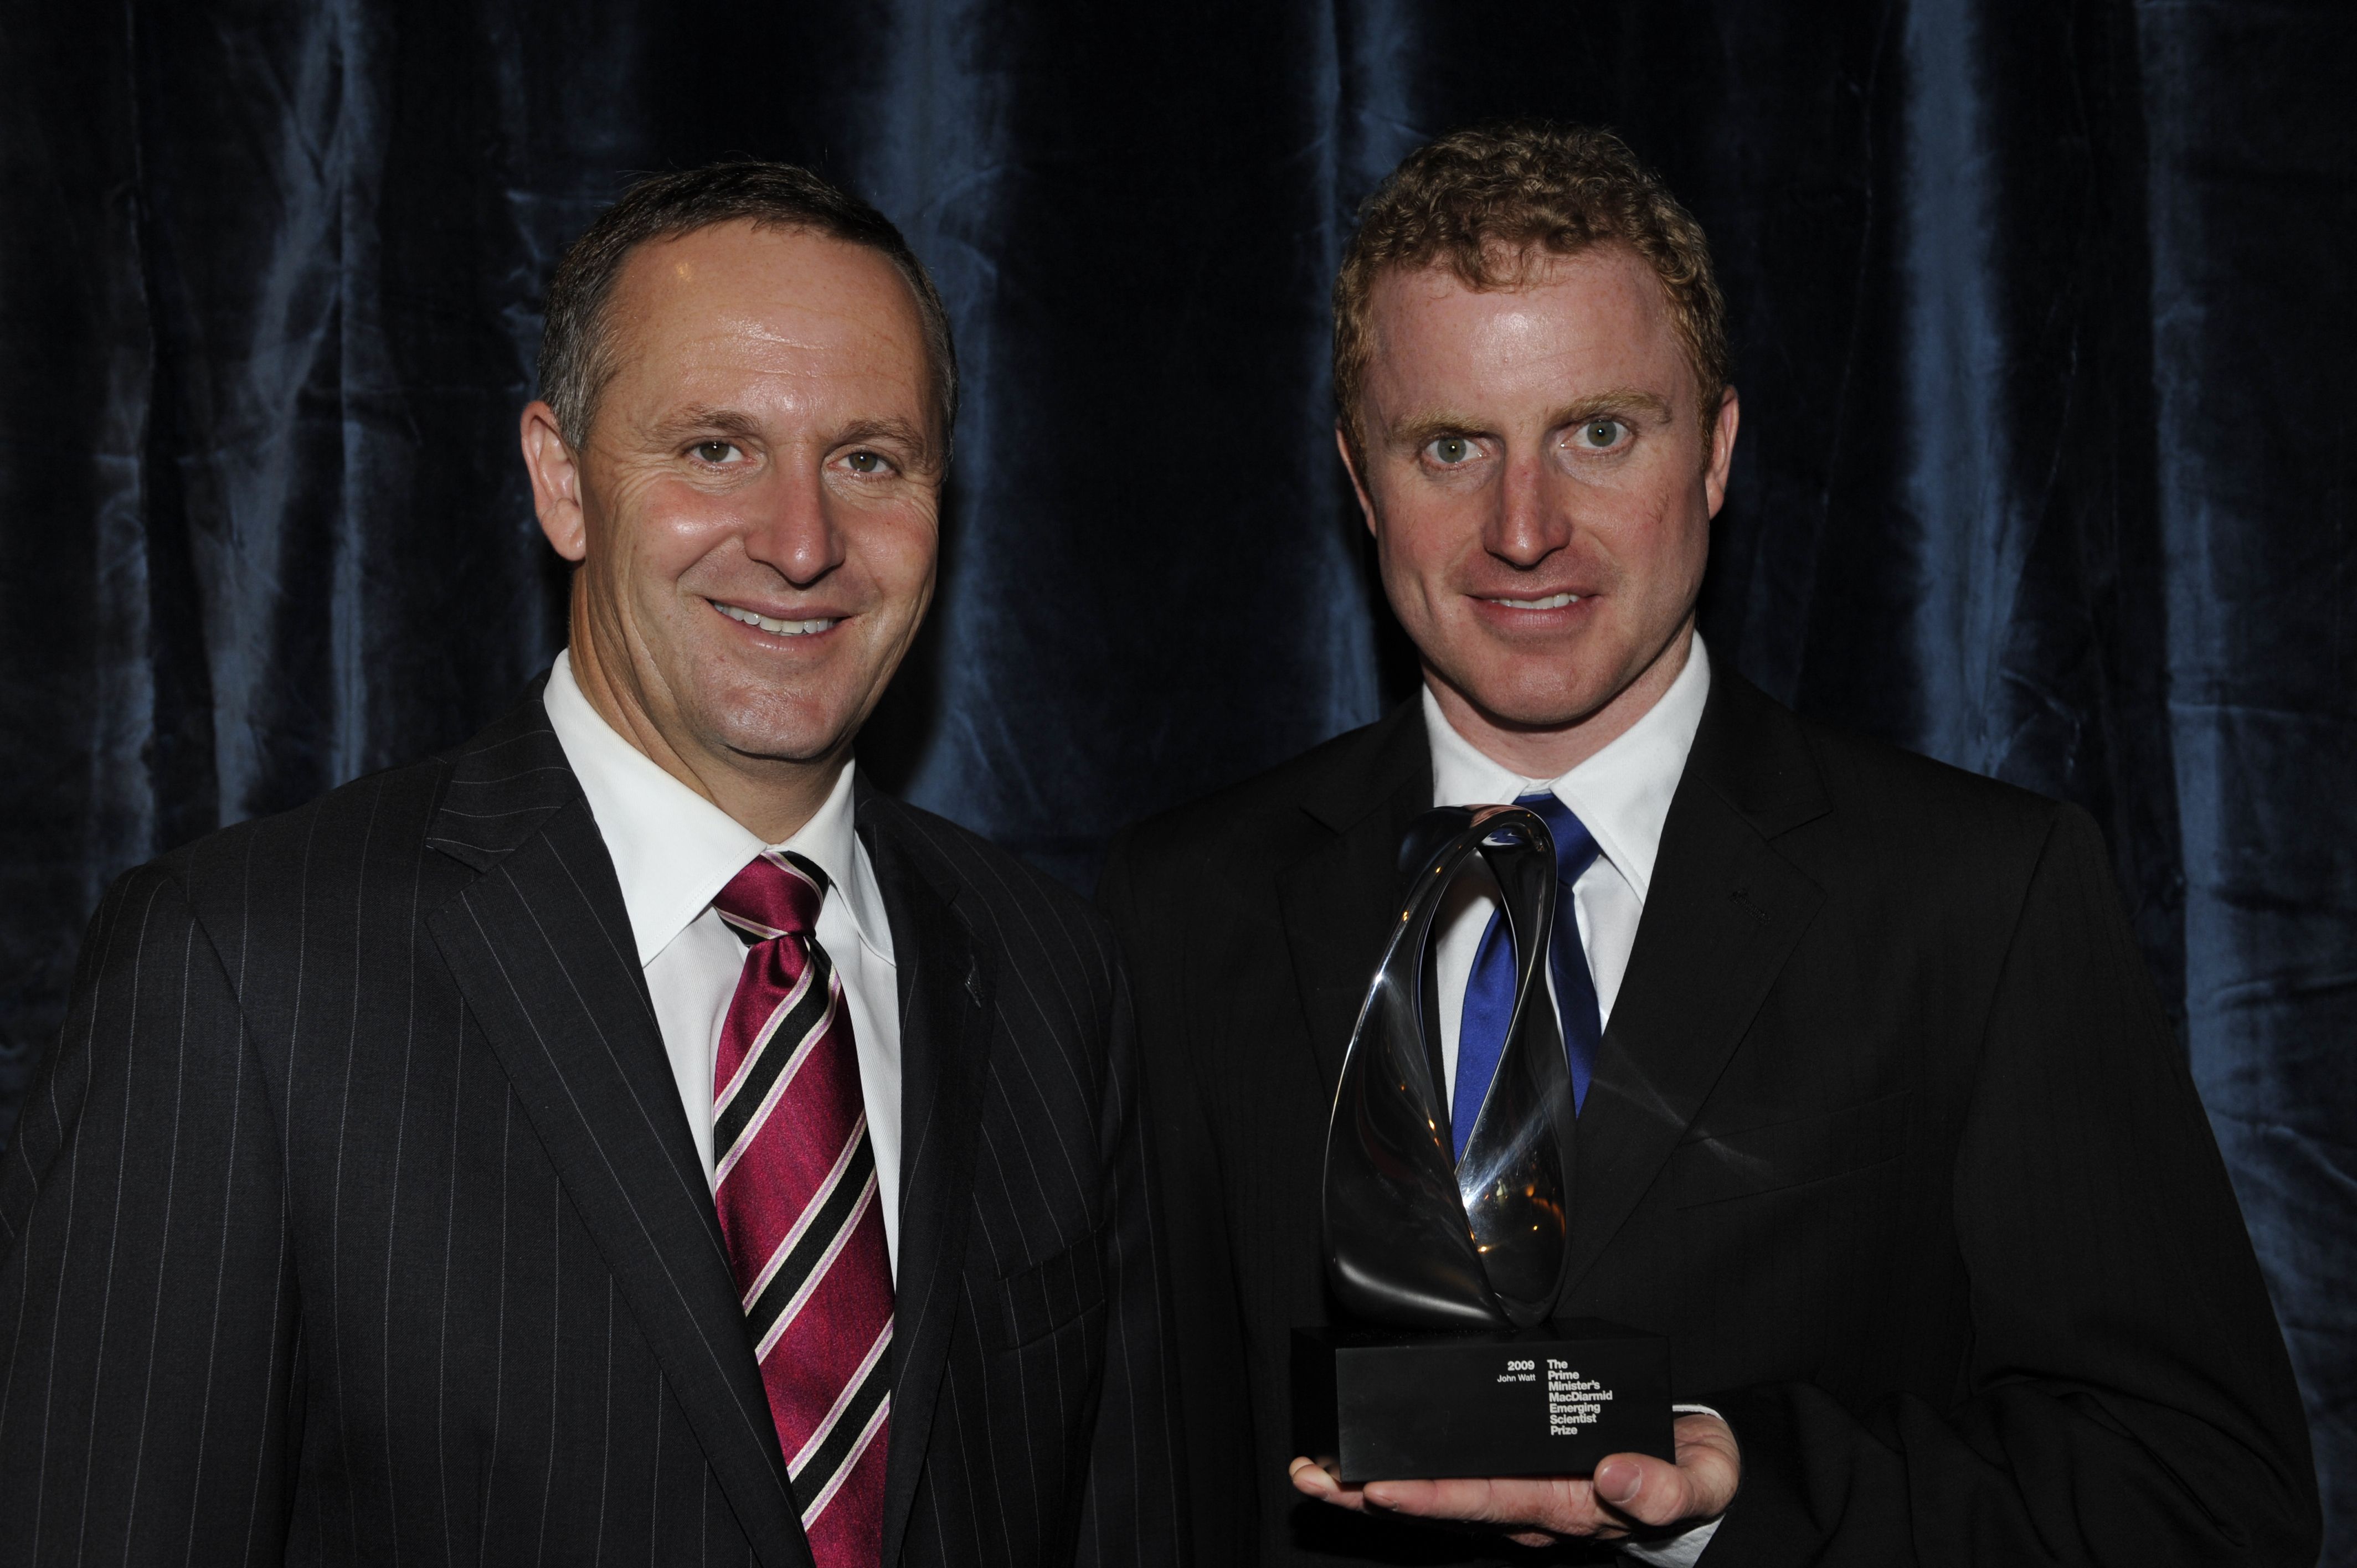 Image:Prime Minister’s MacDiarmid Emerging Scientist Prize 2009